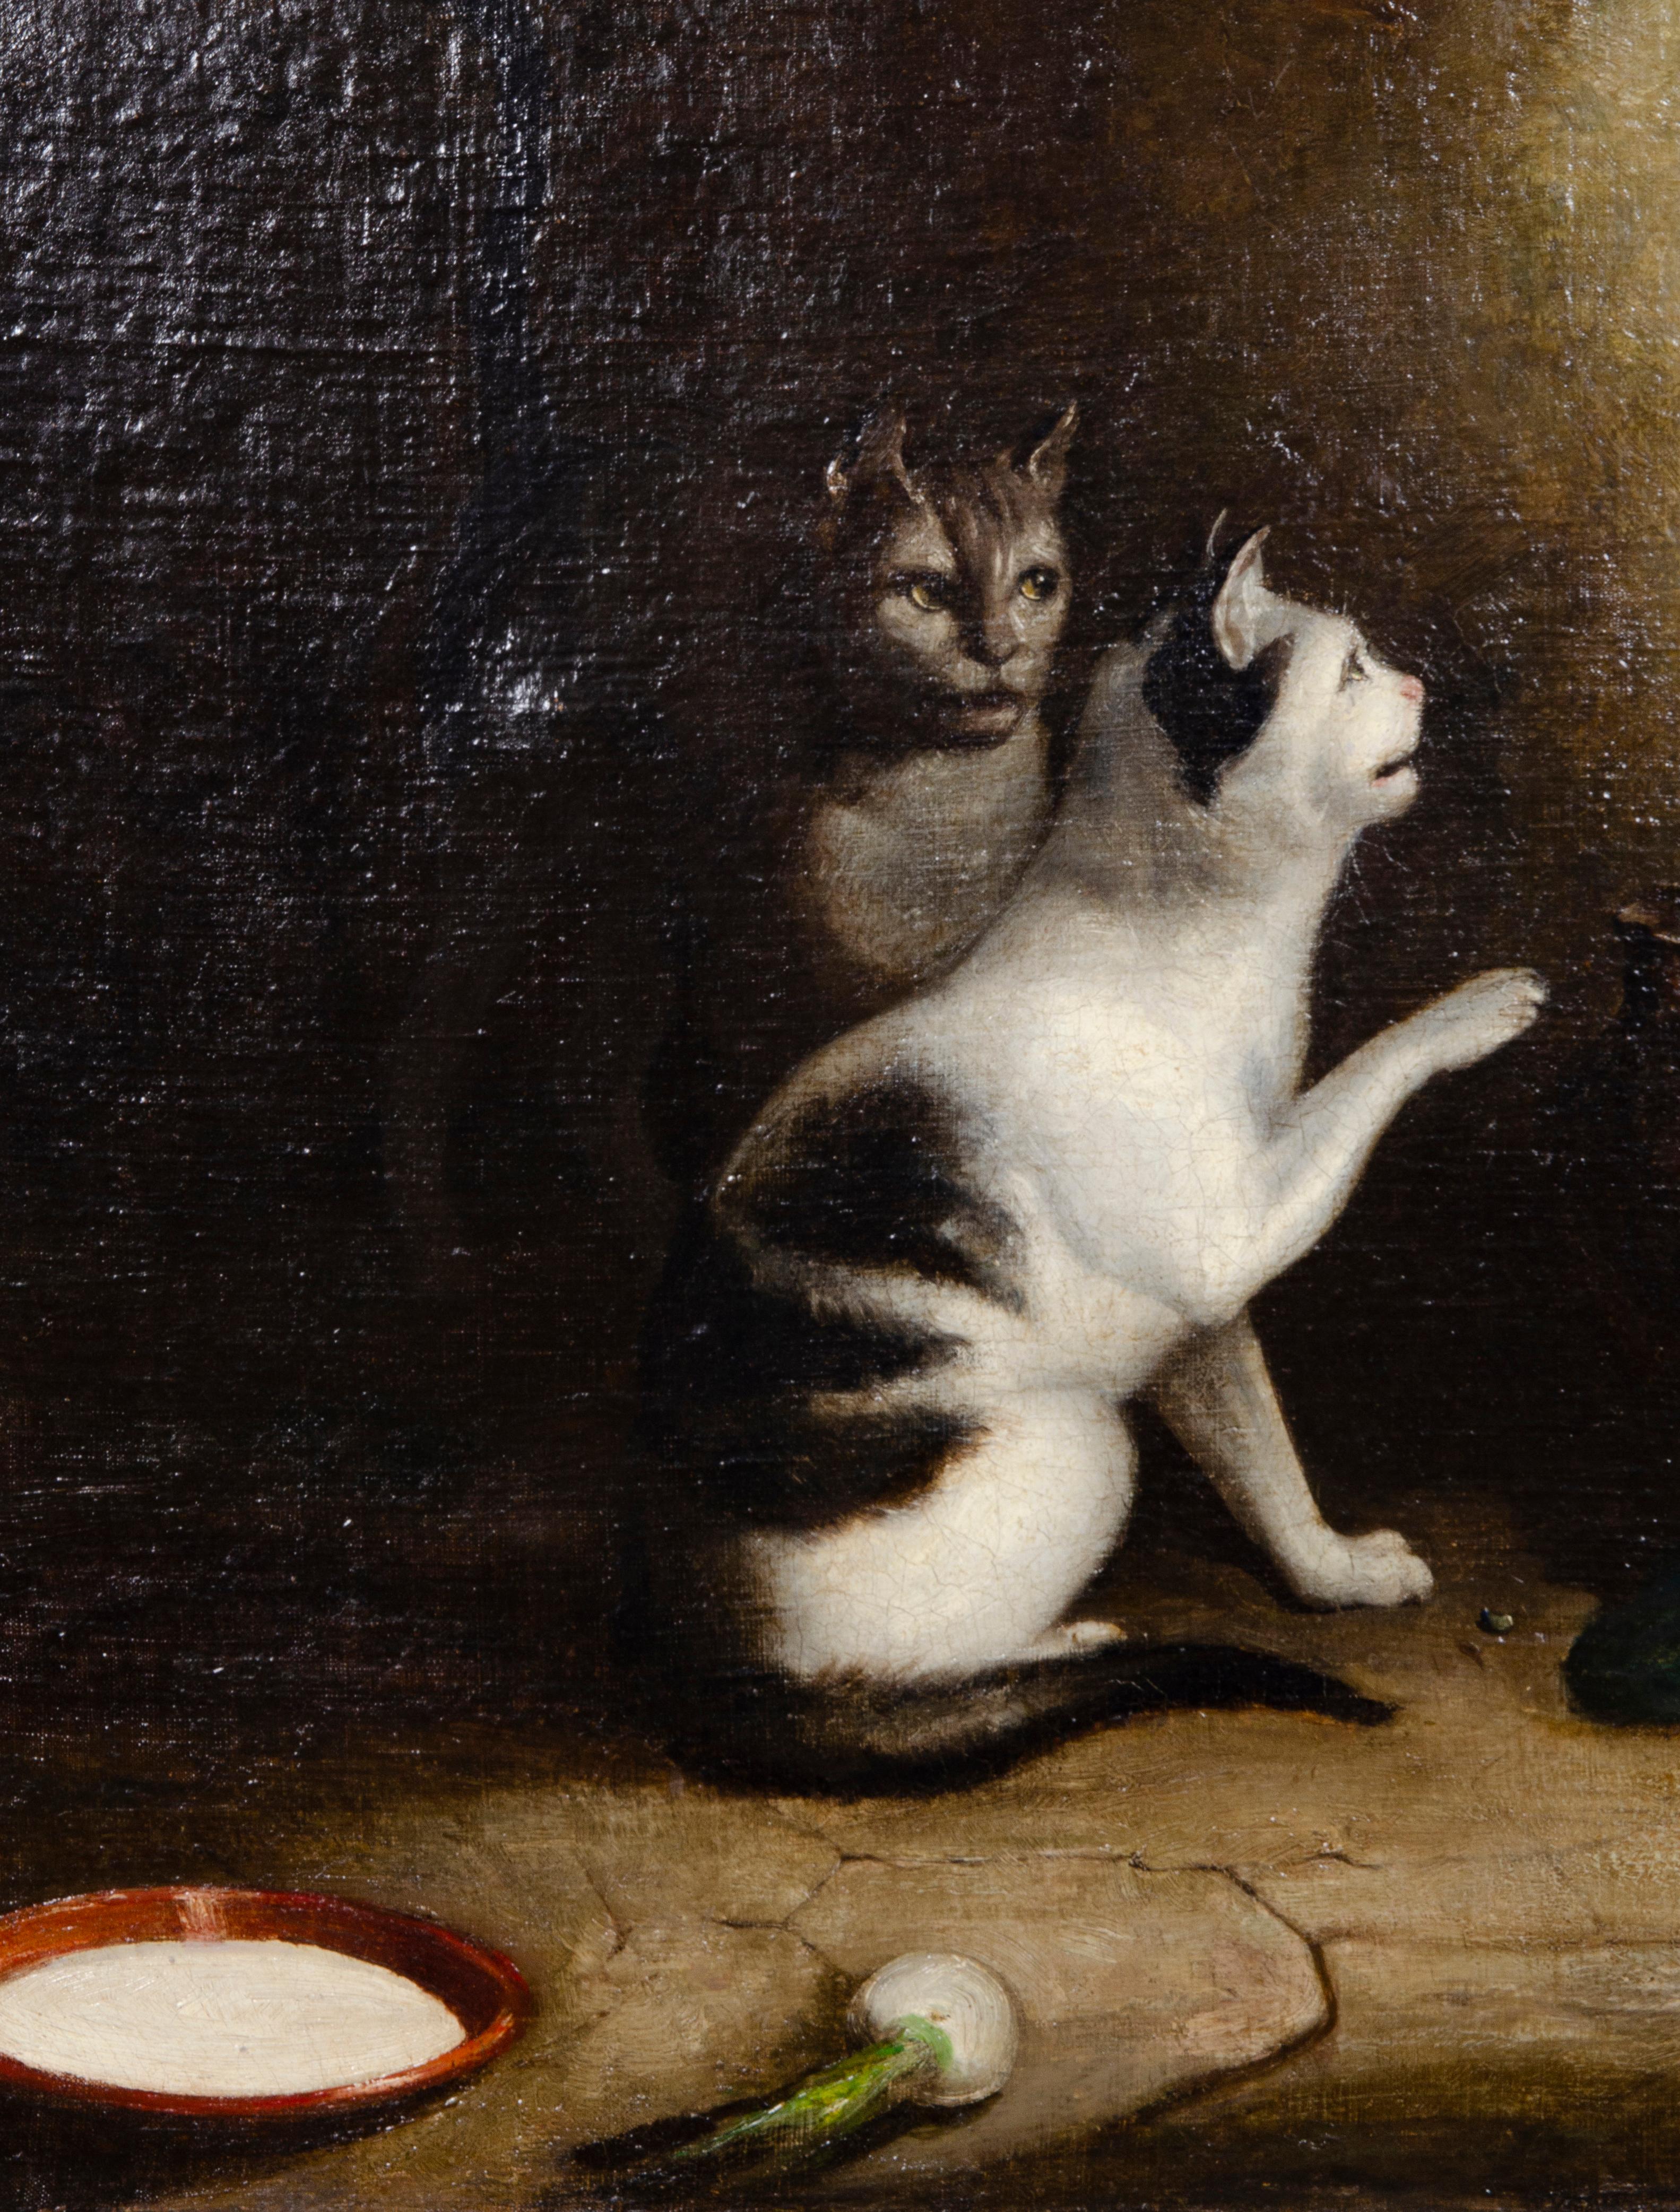 Baroque Revival European Oil on Canvas of a Monkey and a Cat Playing